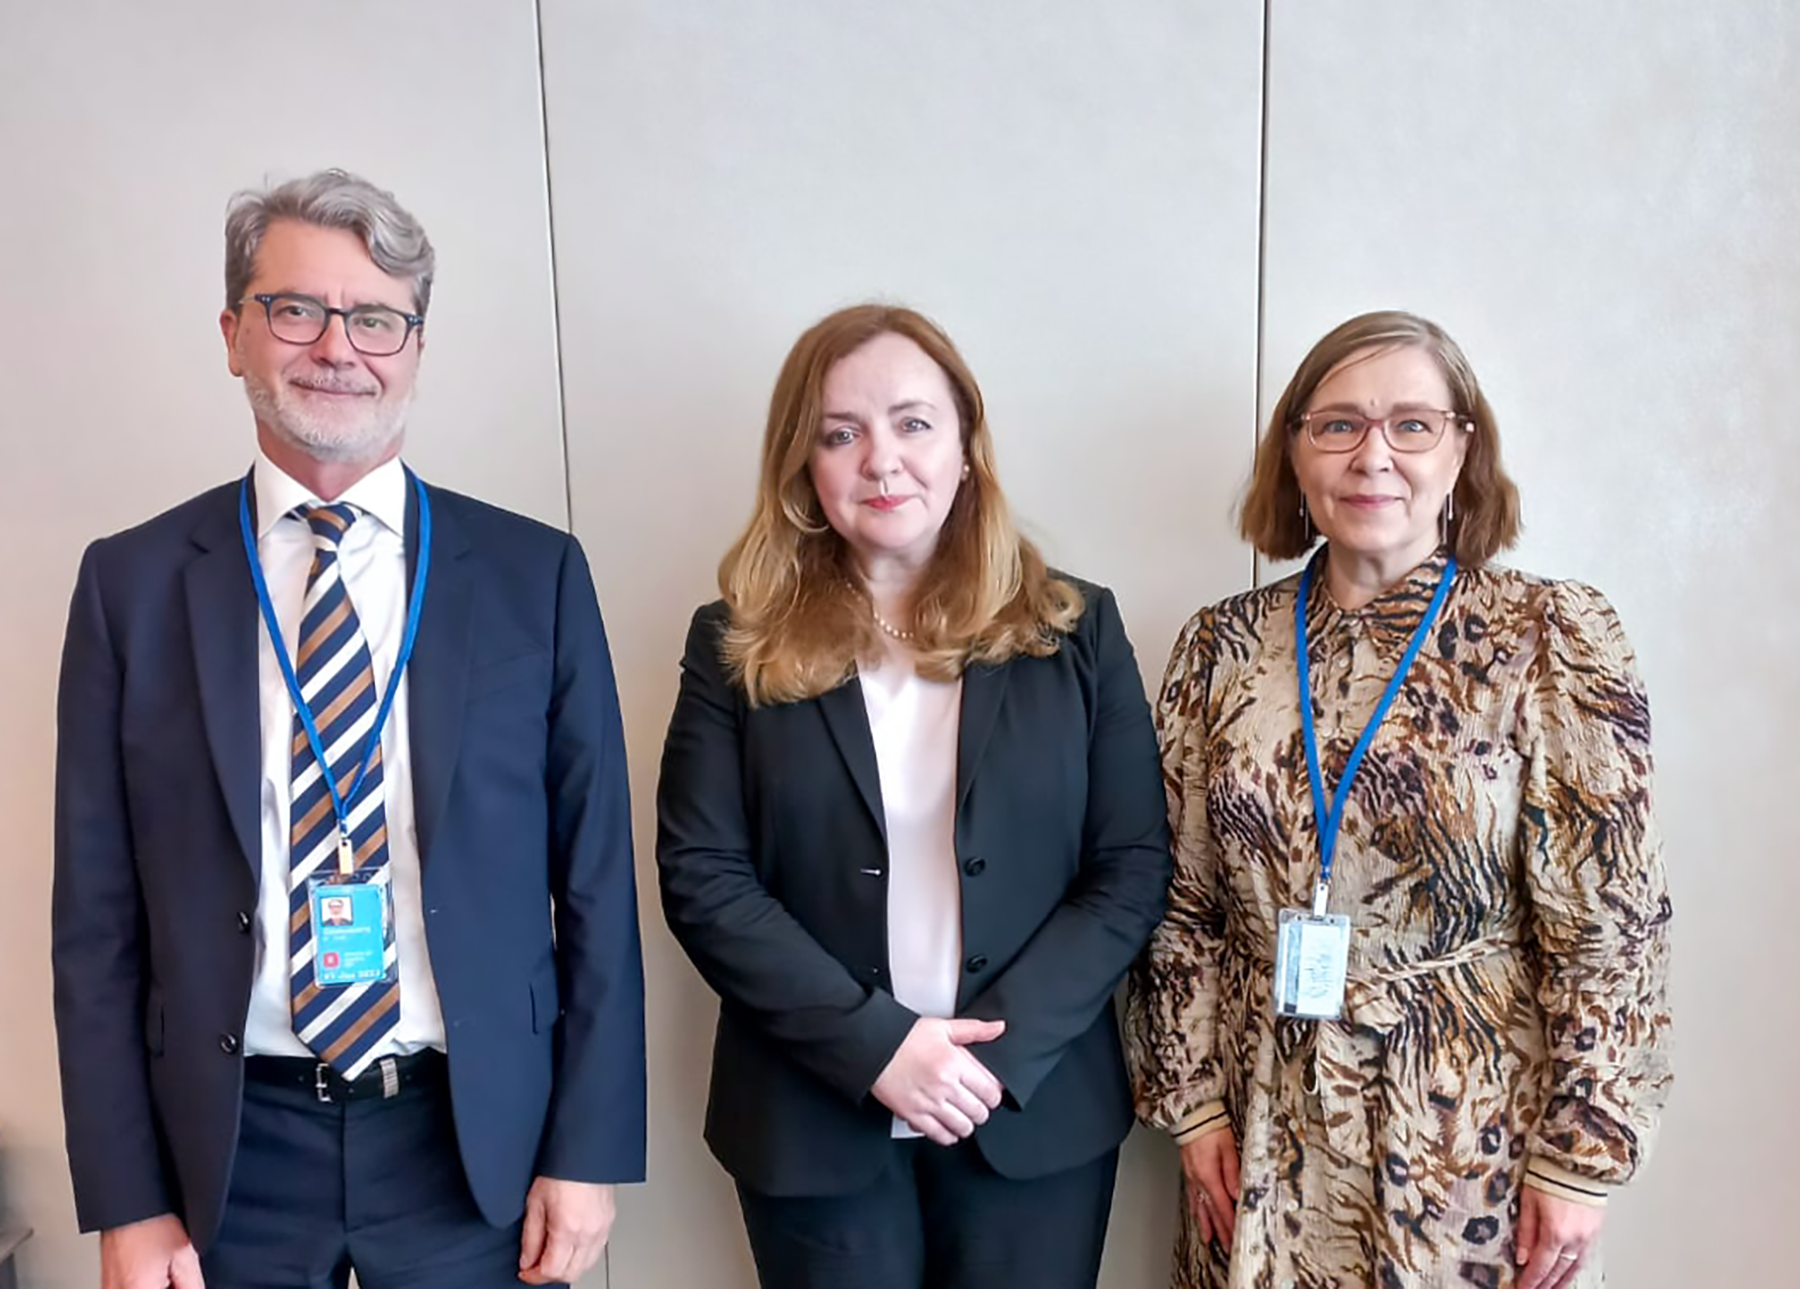 Council of Europe Counter-Terrorism Coordinator, and Chair of the Council of Europe Committee on Counter-terrorism (CDCT) meet with Ms Natalia Gherman, Executive Director of UN CTED